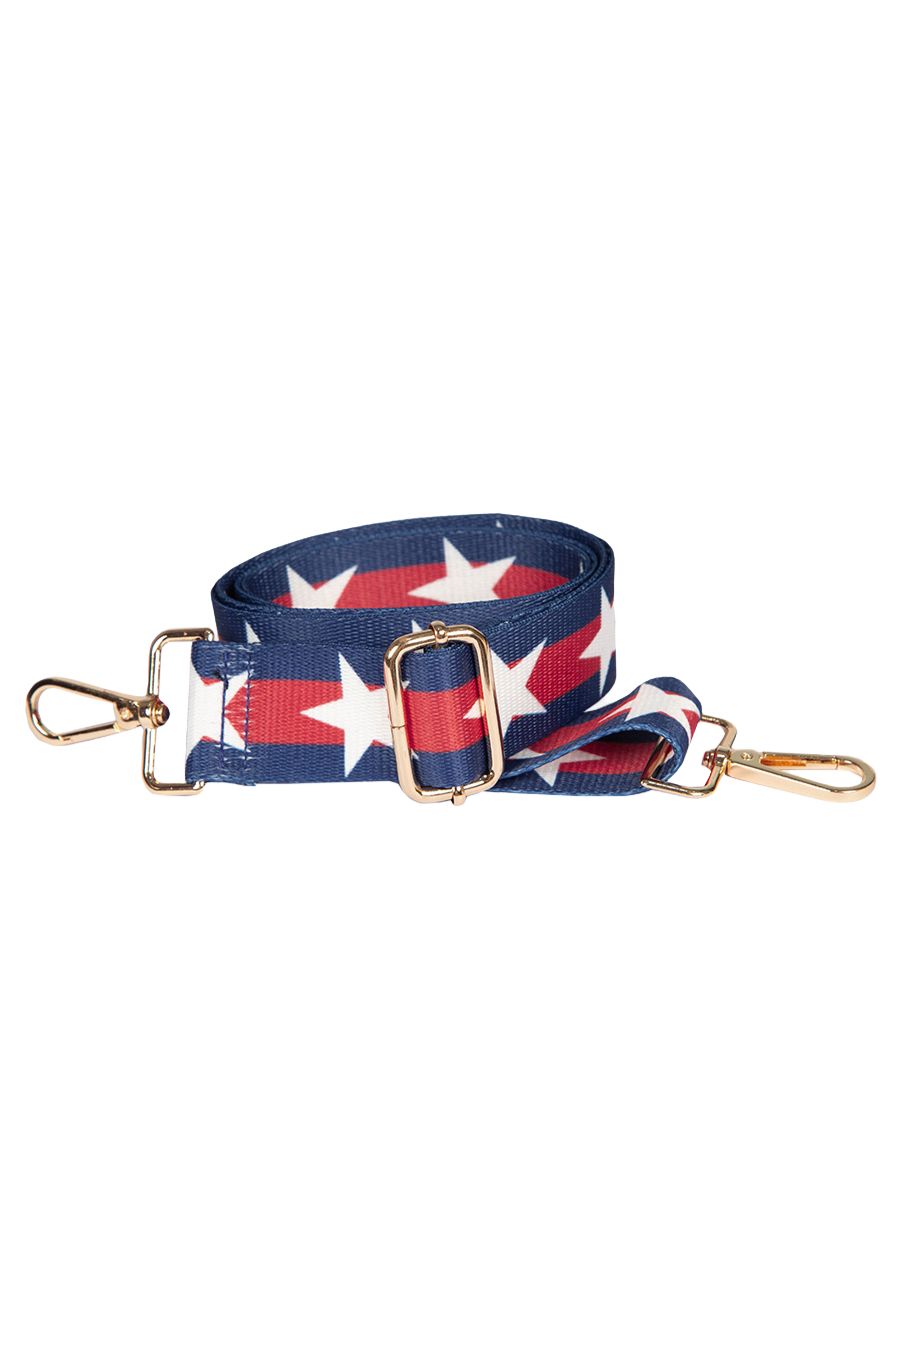 red white and blue stars and stripes bag strap